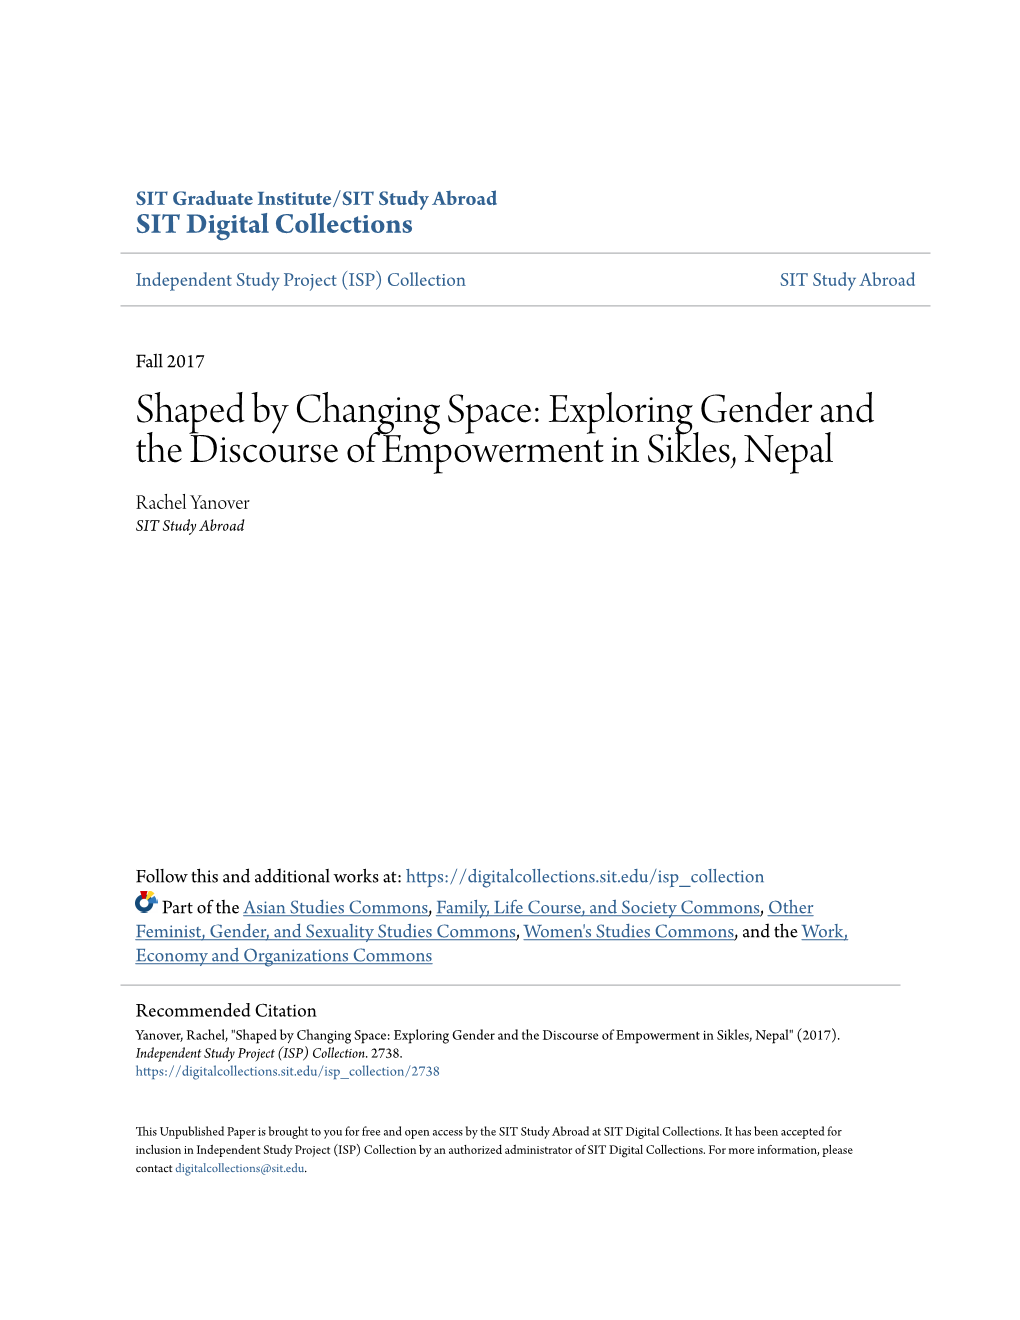 Exploring Gender and the Discourse of Empowerment in Sikles, Nepal Rachel Yanover SIT Study Abroad